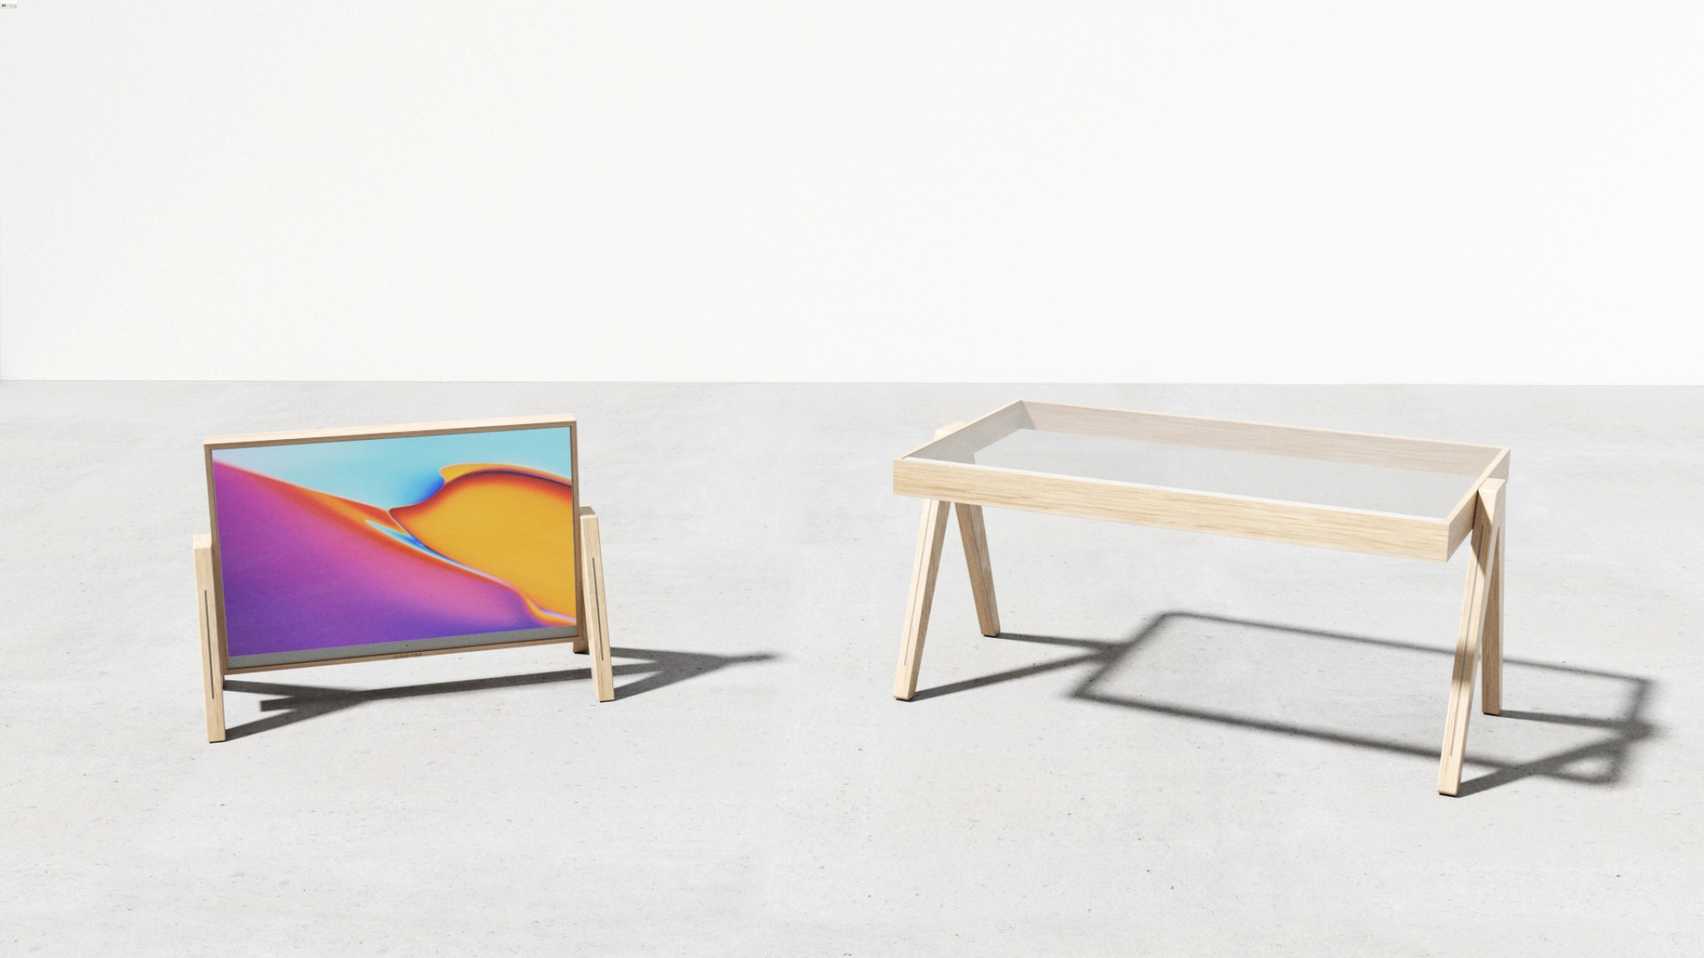 TVBLE by Dunsol Ko tiltable OLED screen table